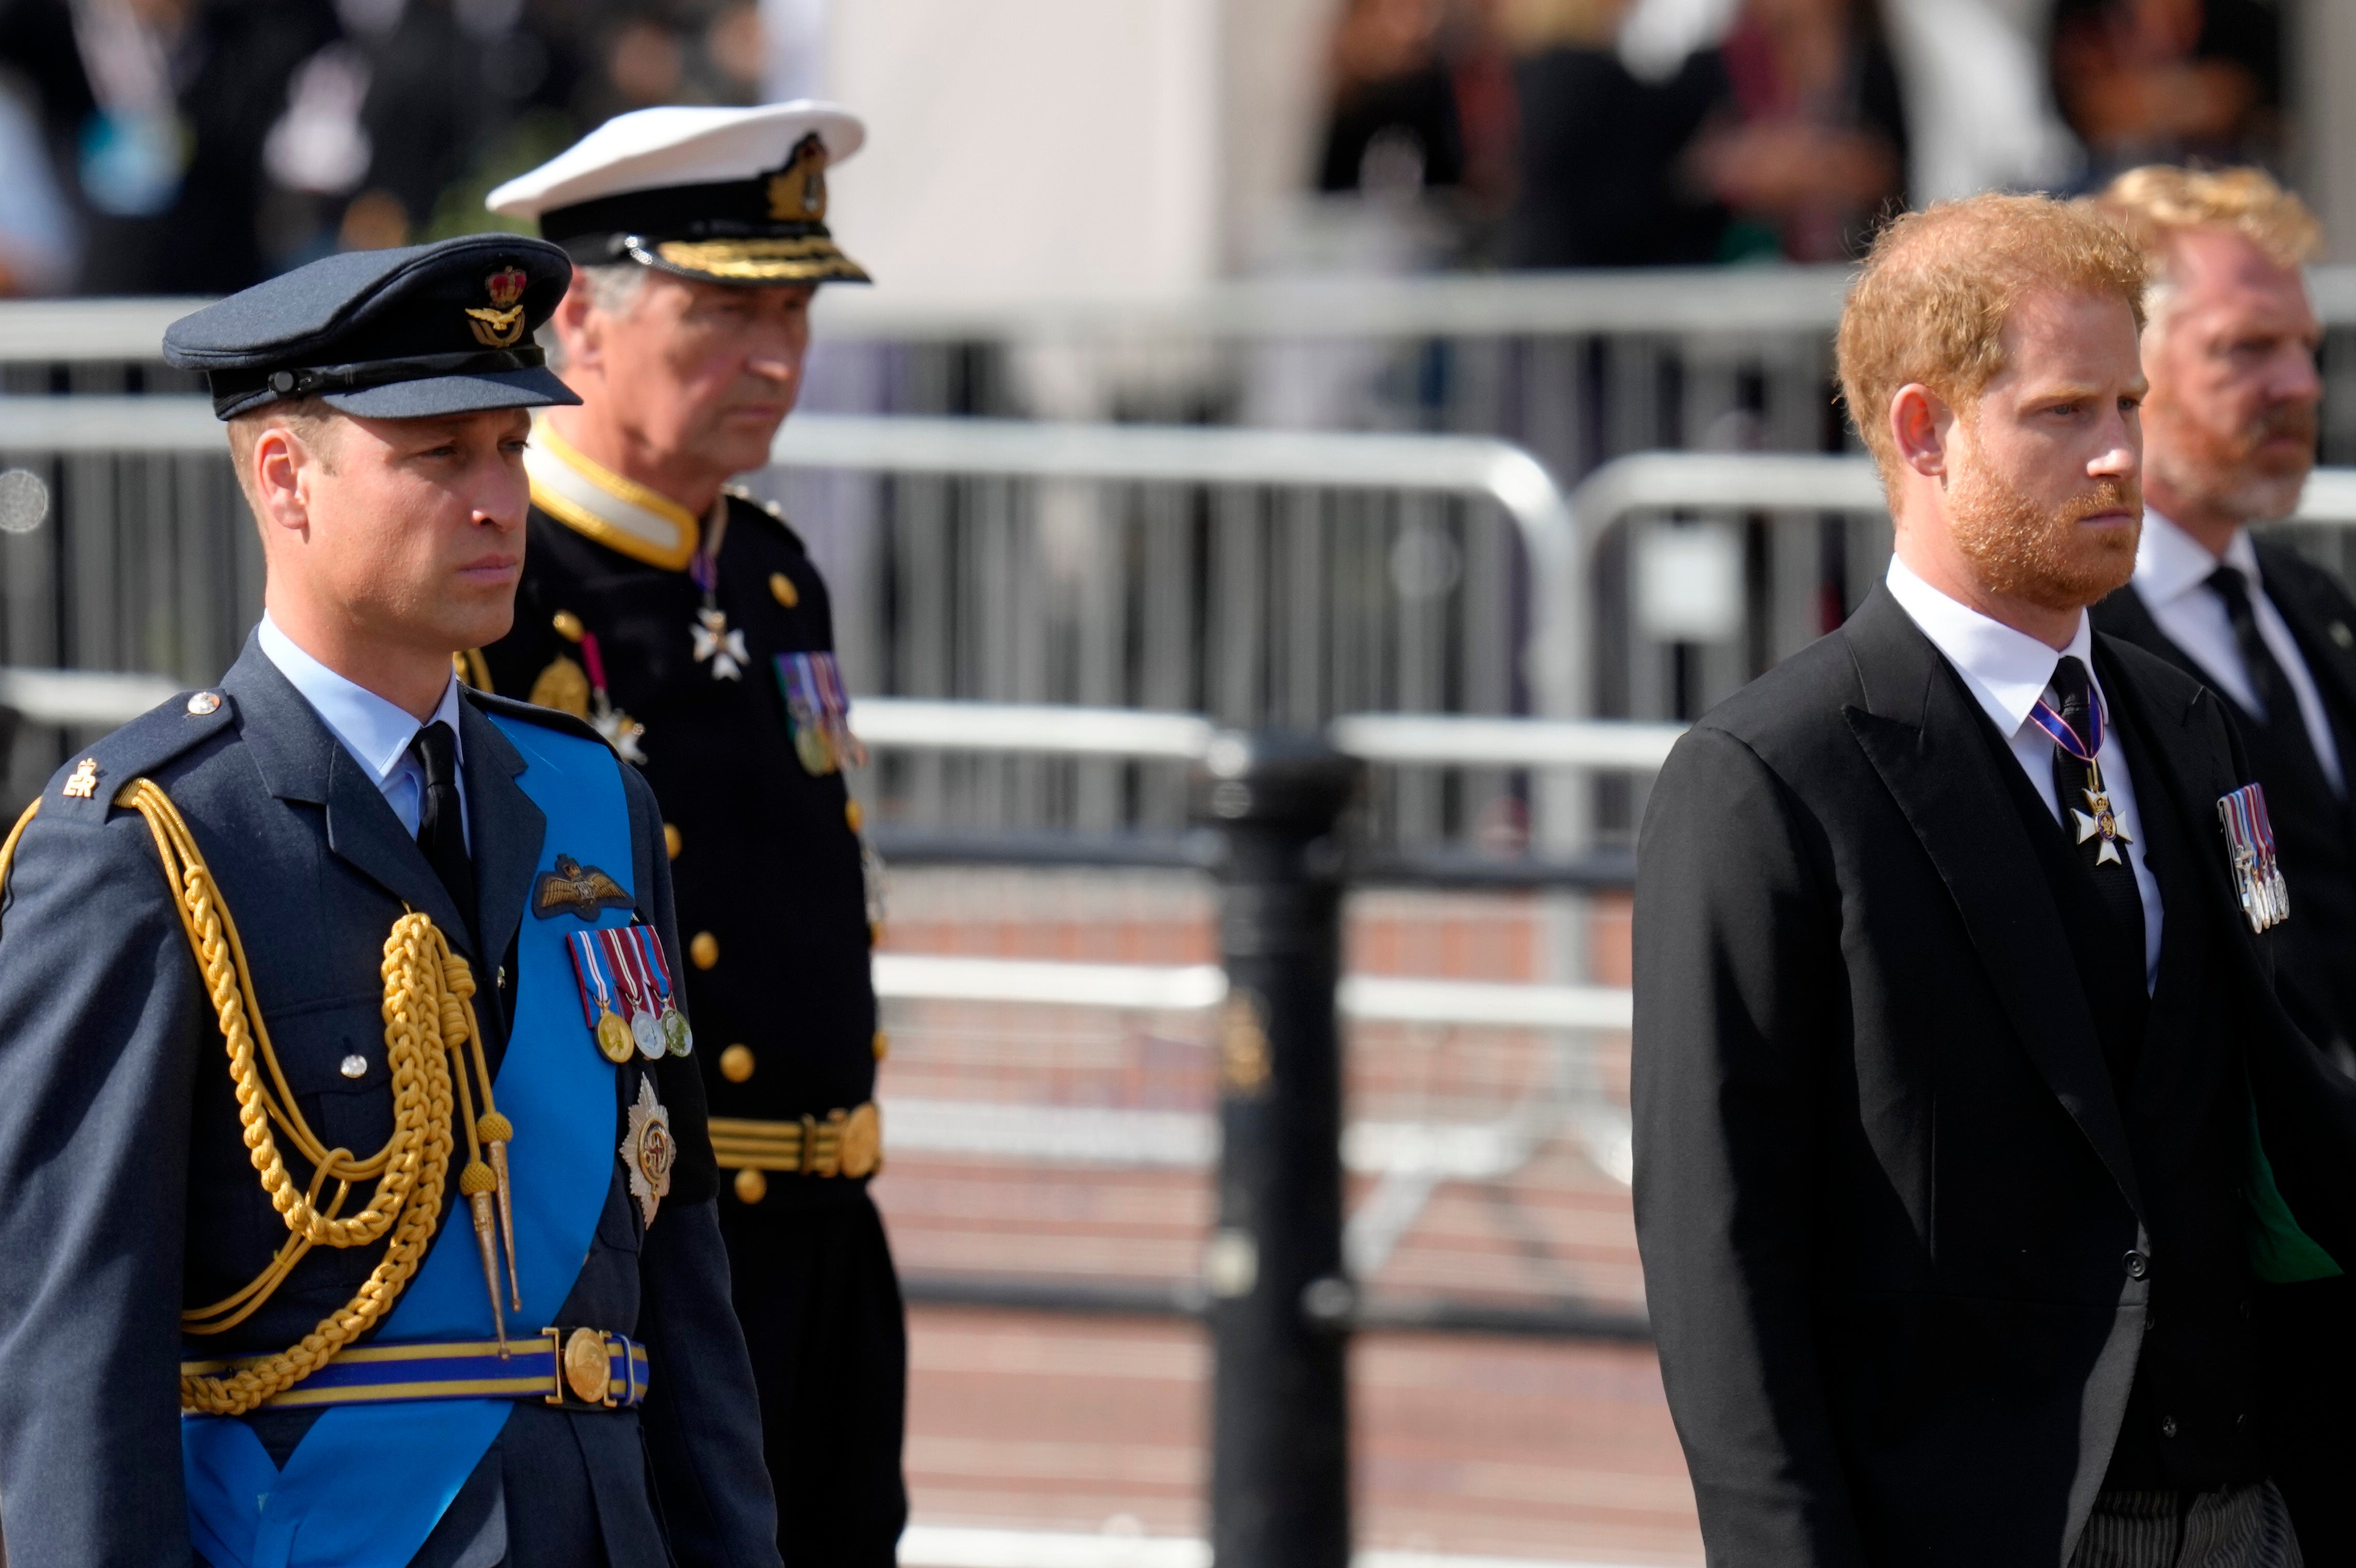 Britain’s King Charles III, second left, Prince Harry, second right, and Prince William, left, follow the coffin of Queen Elizabeth II during a procession from Buckingham Palace to Westminster Hall